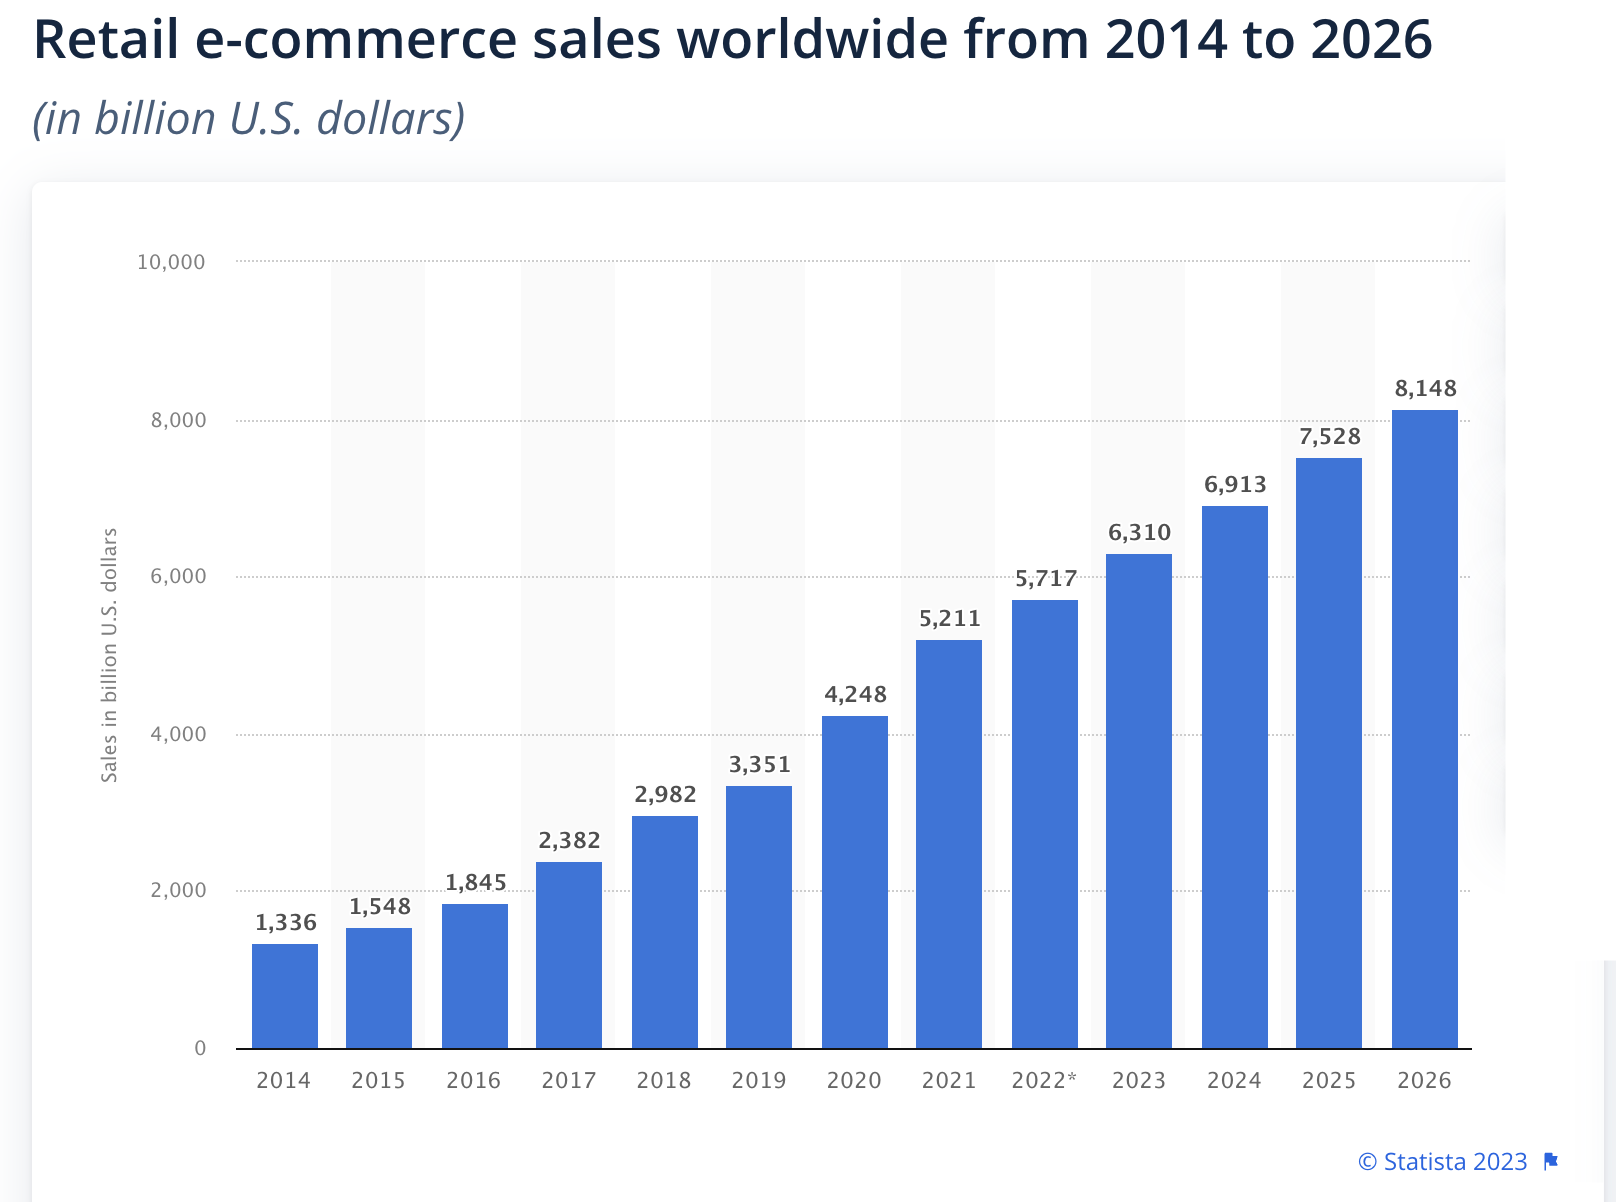 Global eCommerce sales are expected to climb to $8,148 Billion USD by 2026 according to Statistica